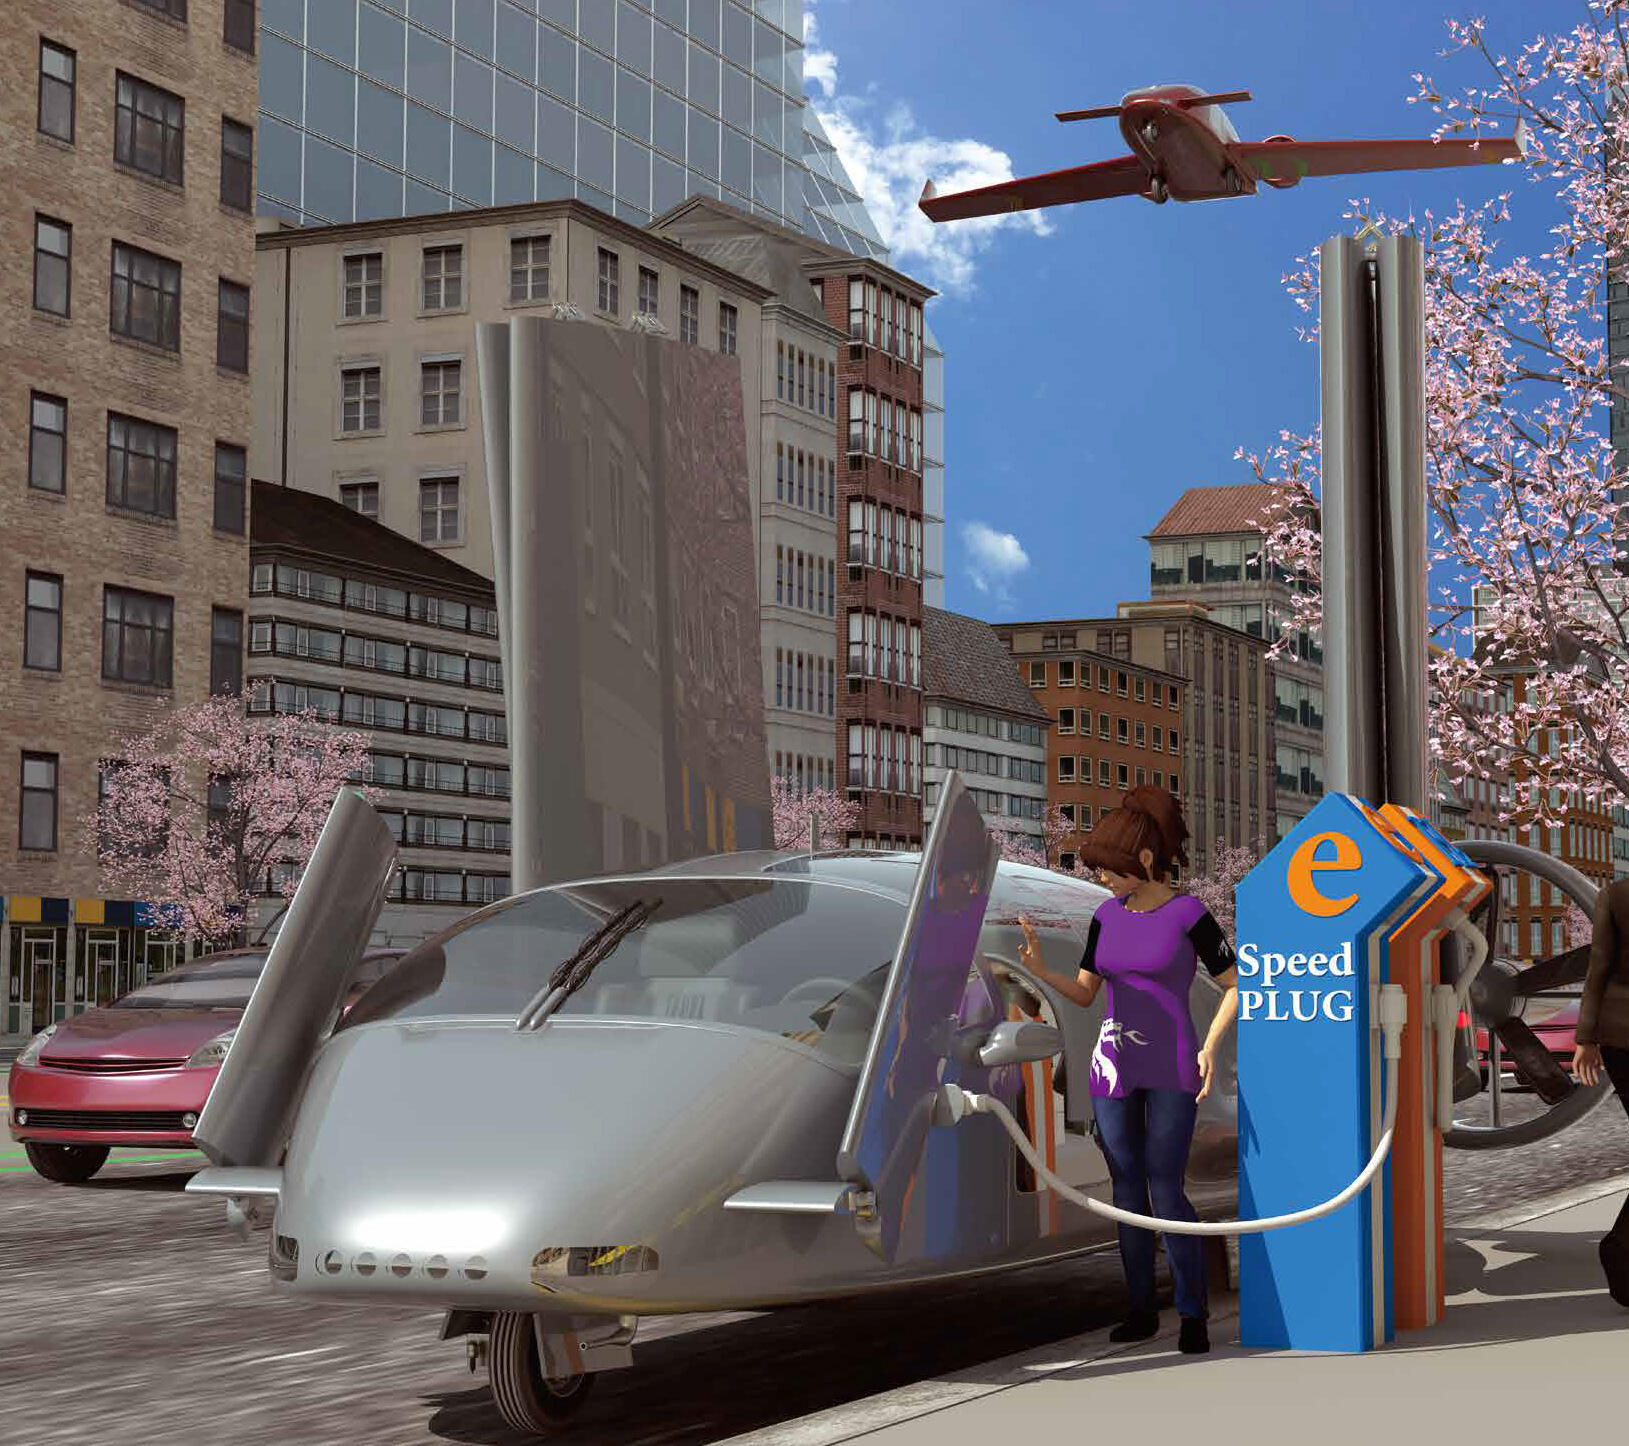 Illustrative image of a small electric aircraft of the future